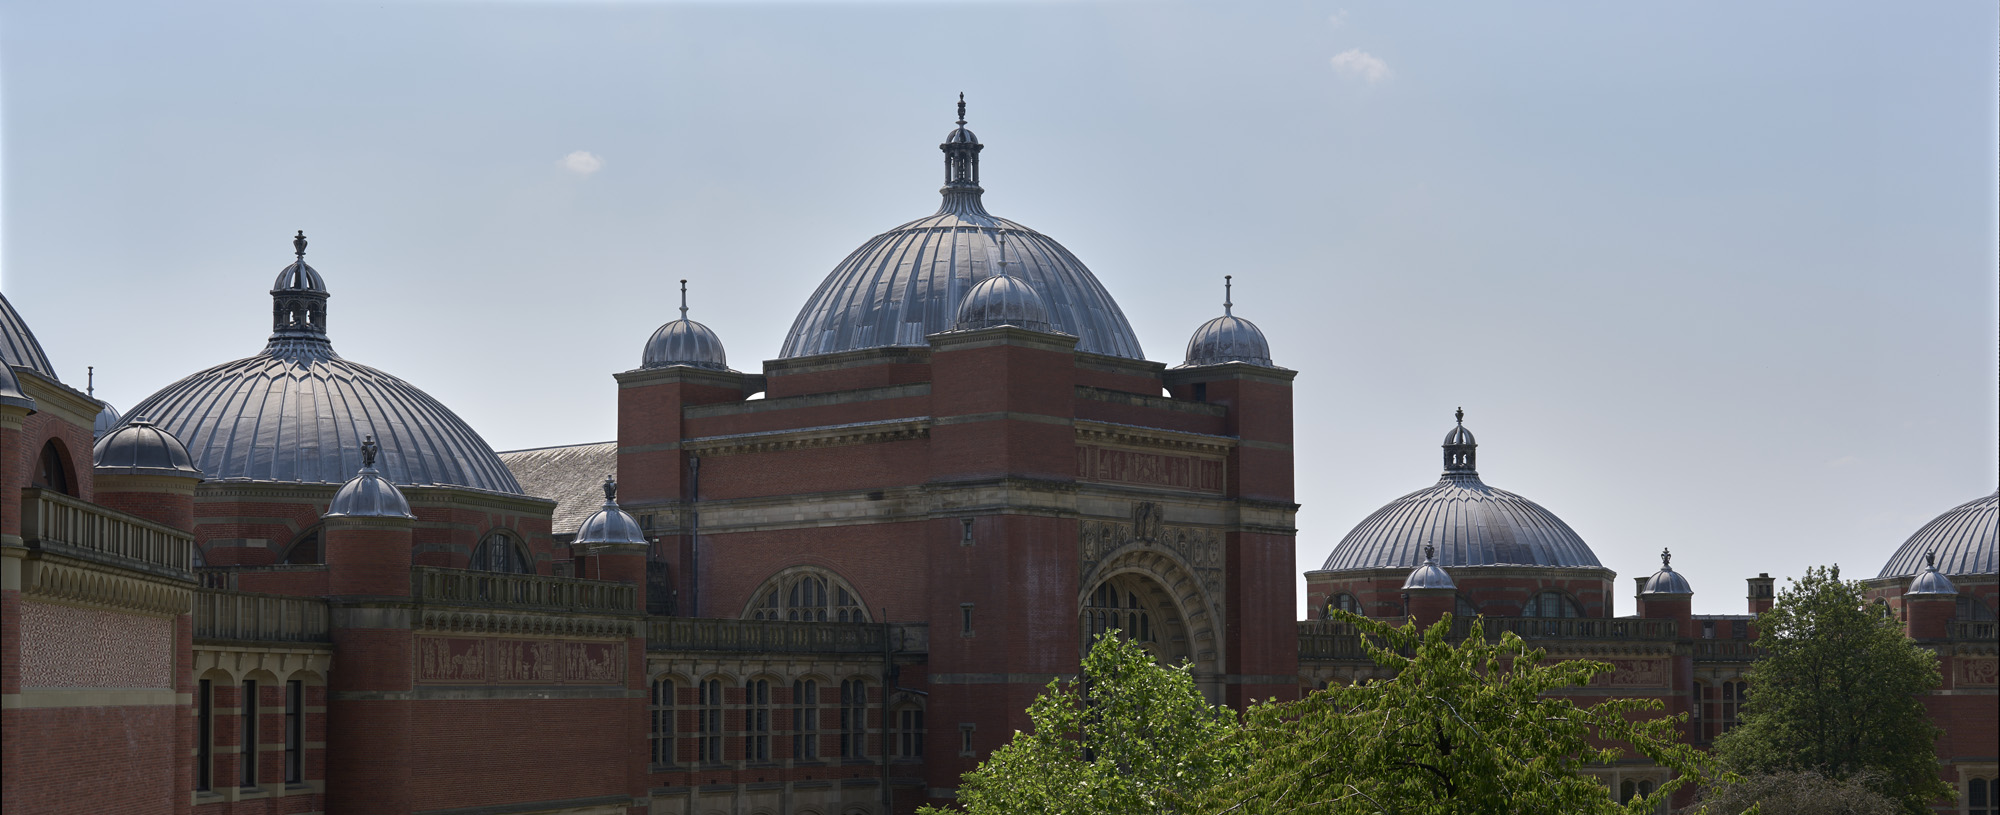 Rooftops of Chancellor's Court at the University of Birmingham